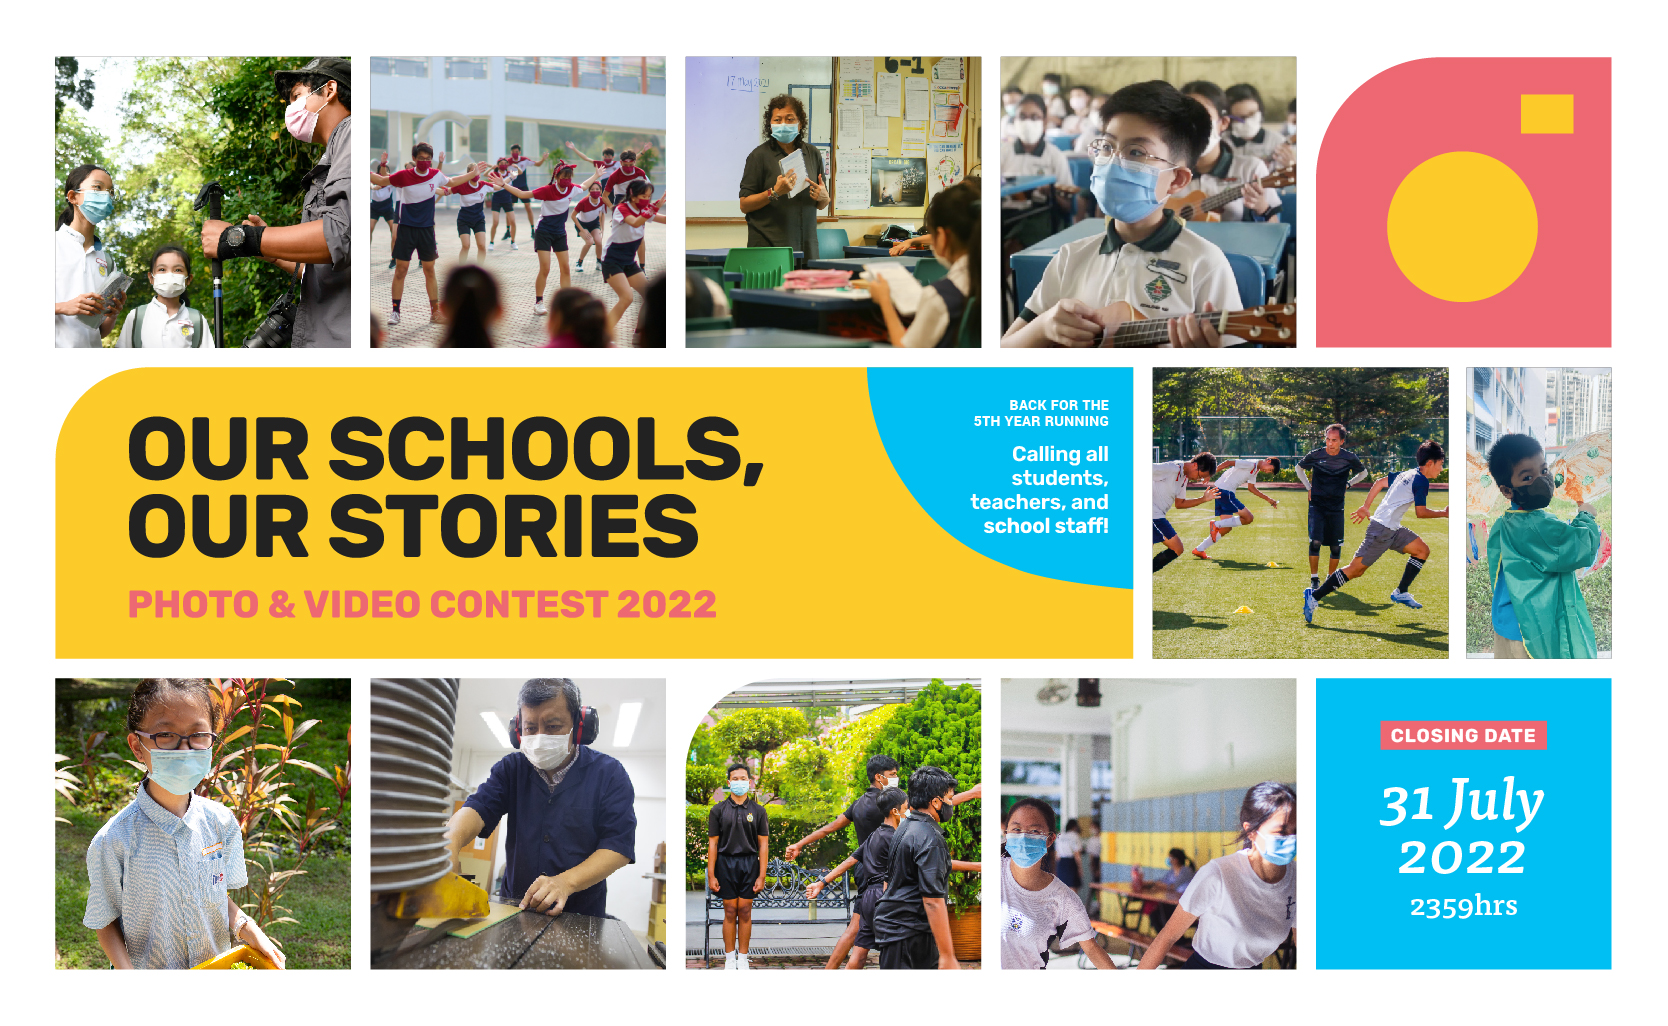 Our Schools, Our Stories 2022 photo and video contest